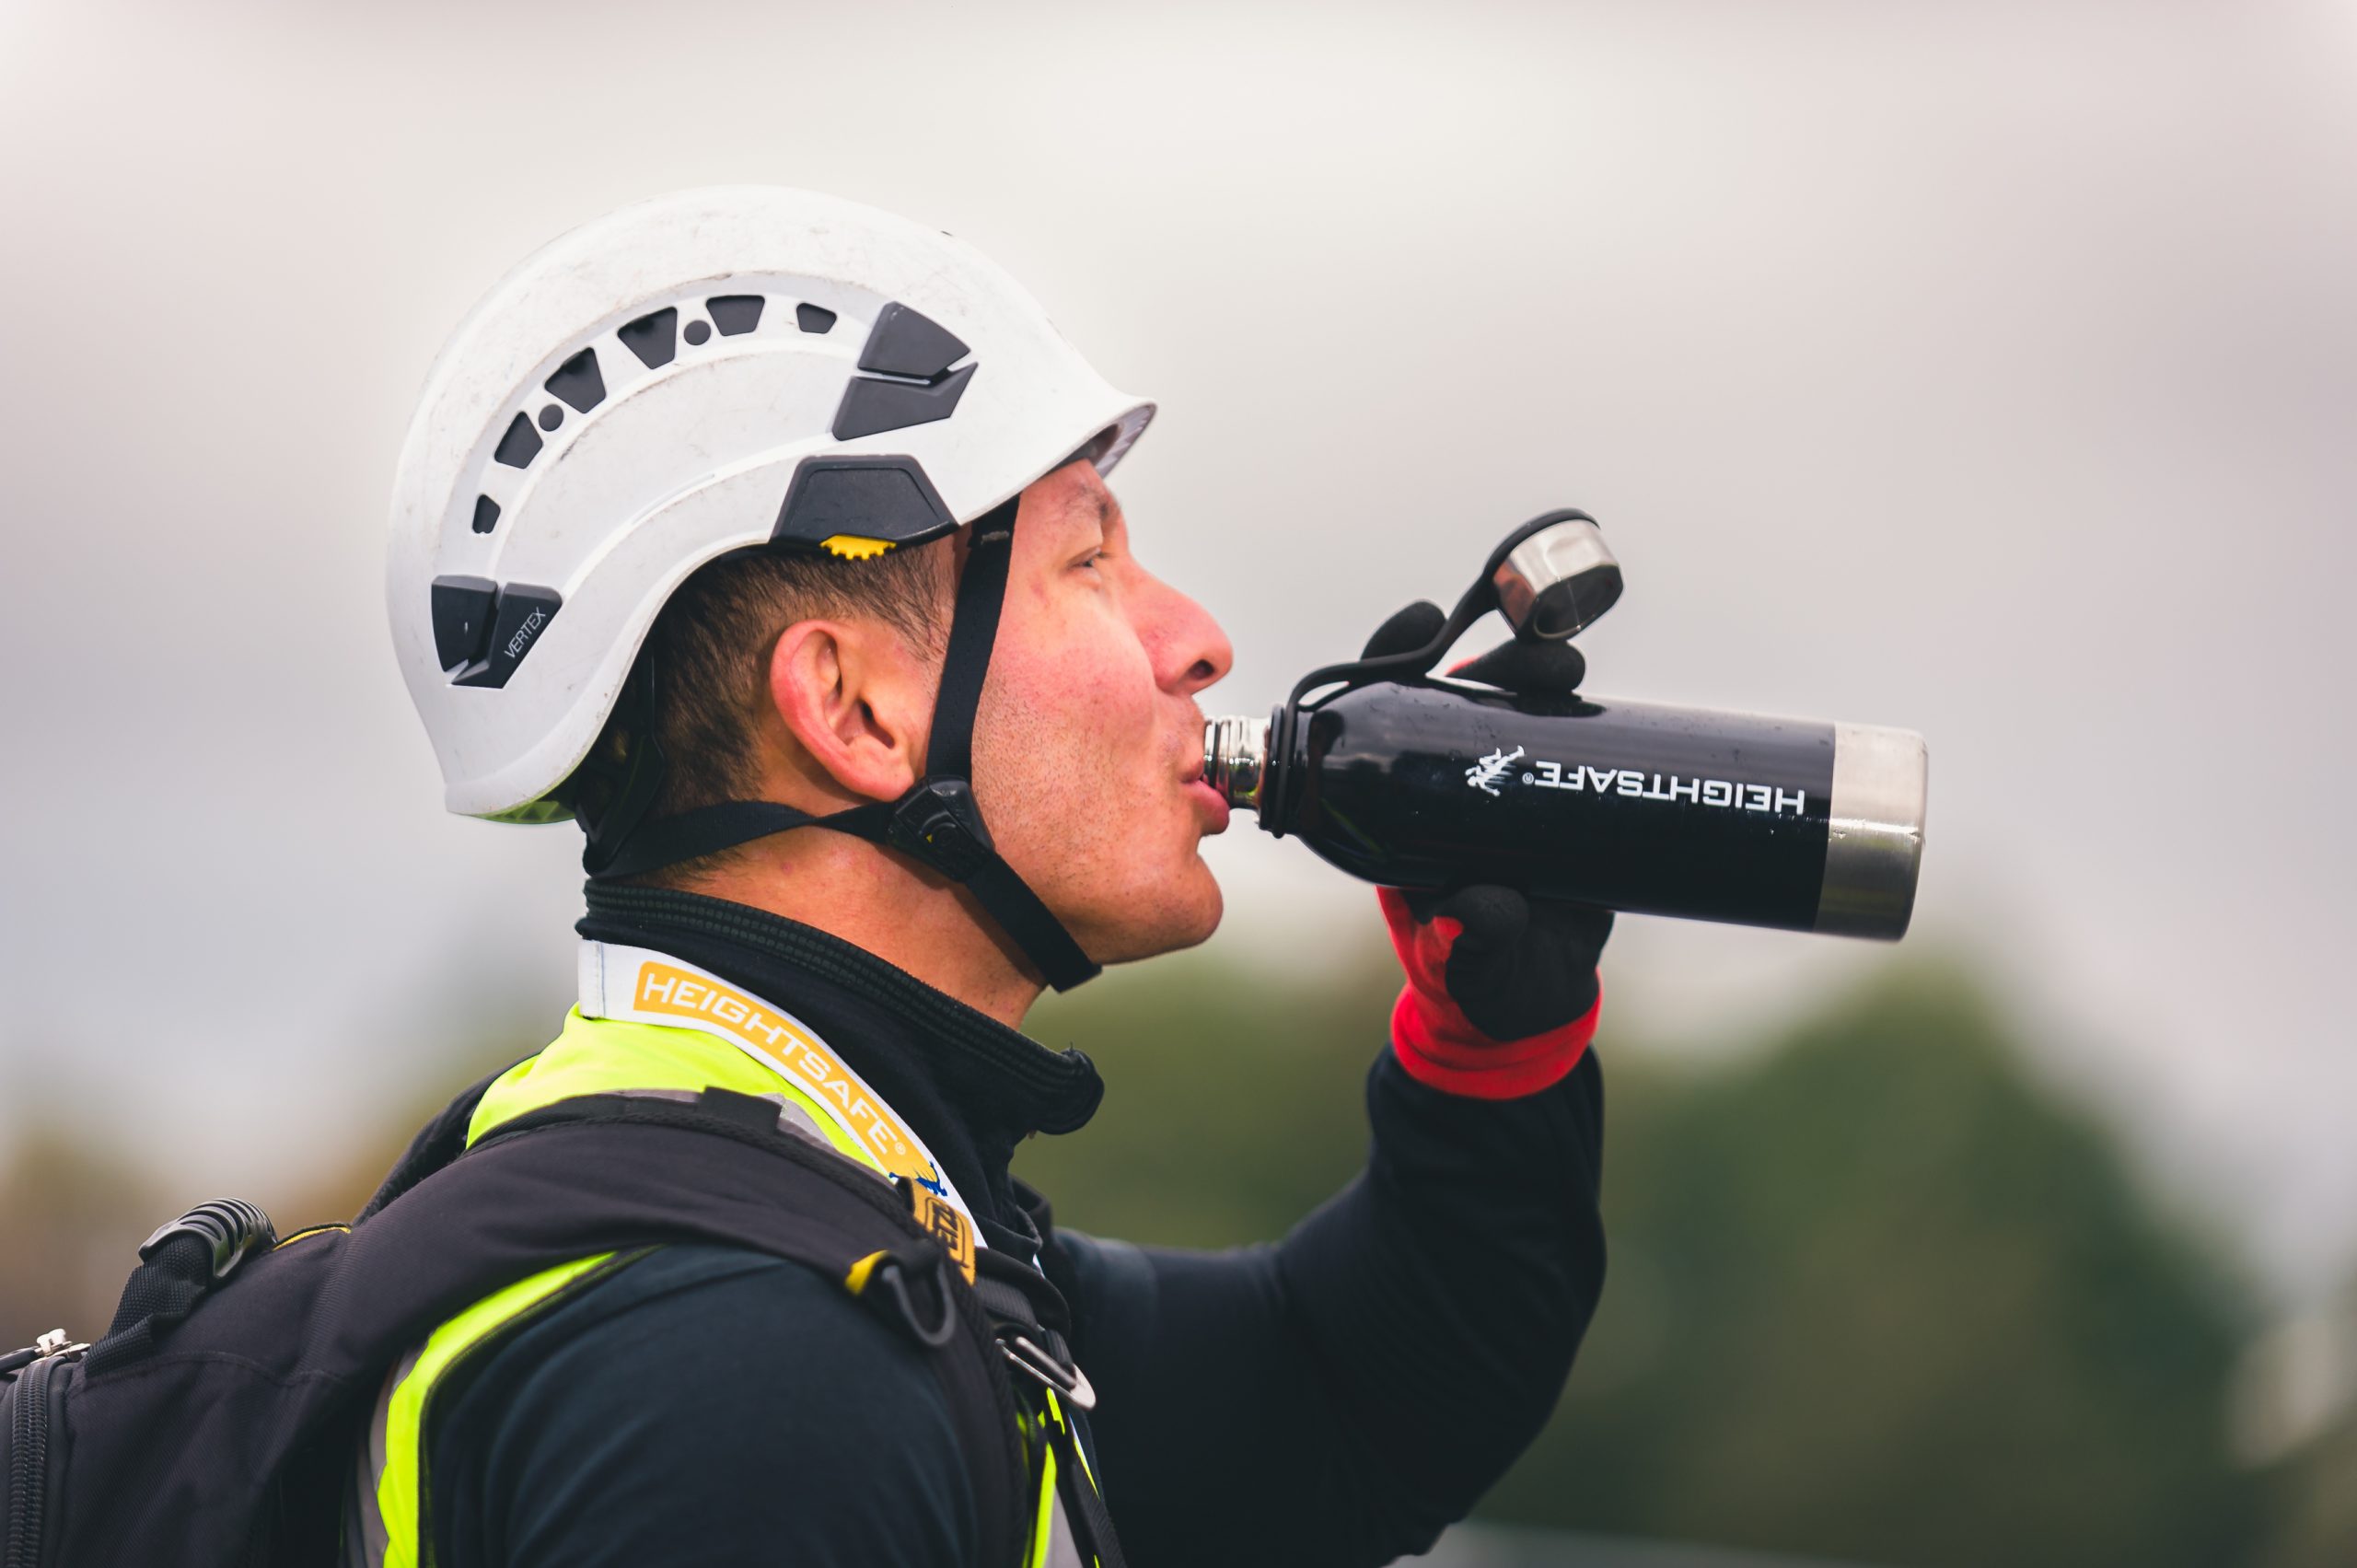 Heightsafe engineer drinking from a Heightsafe water bottle